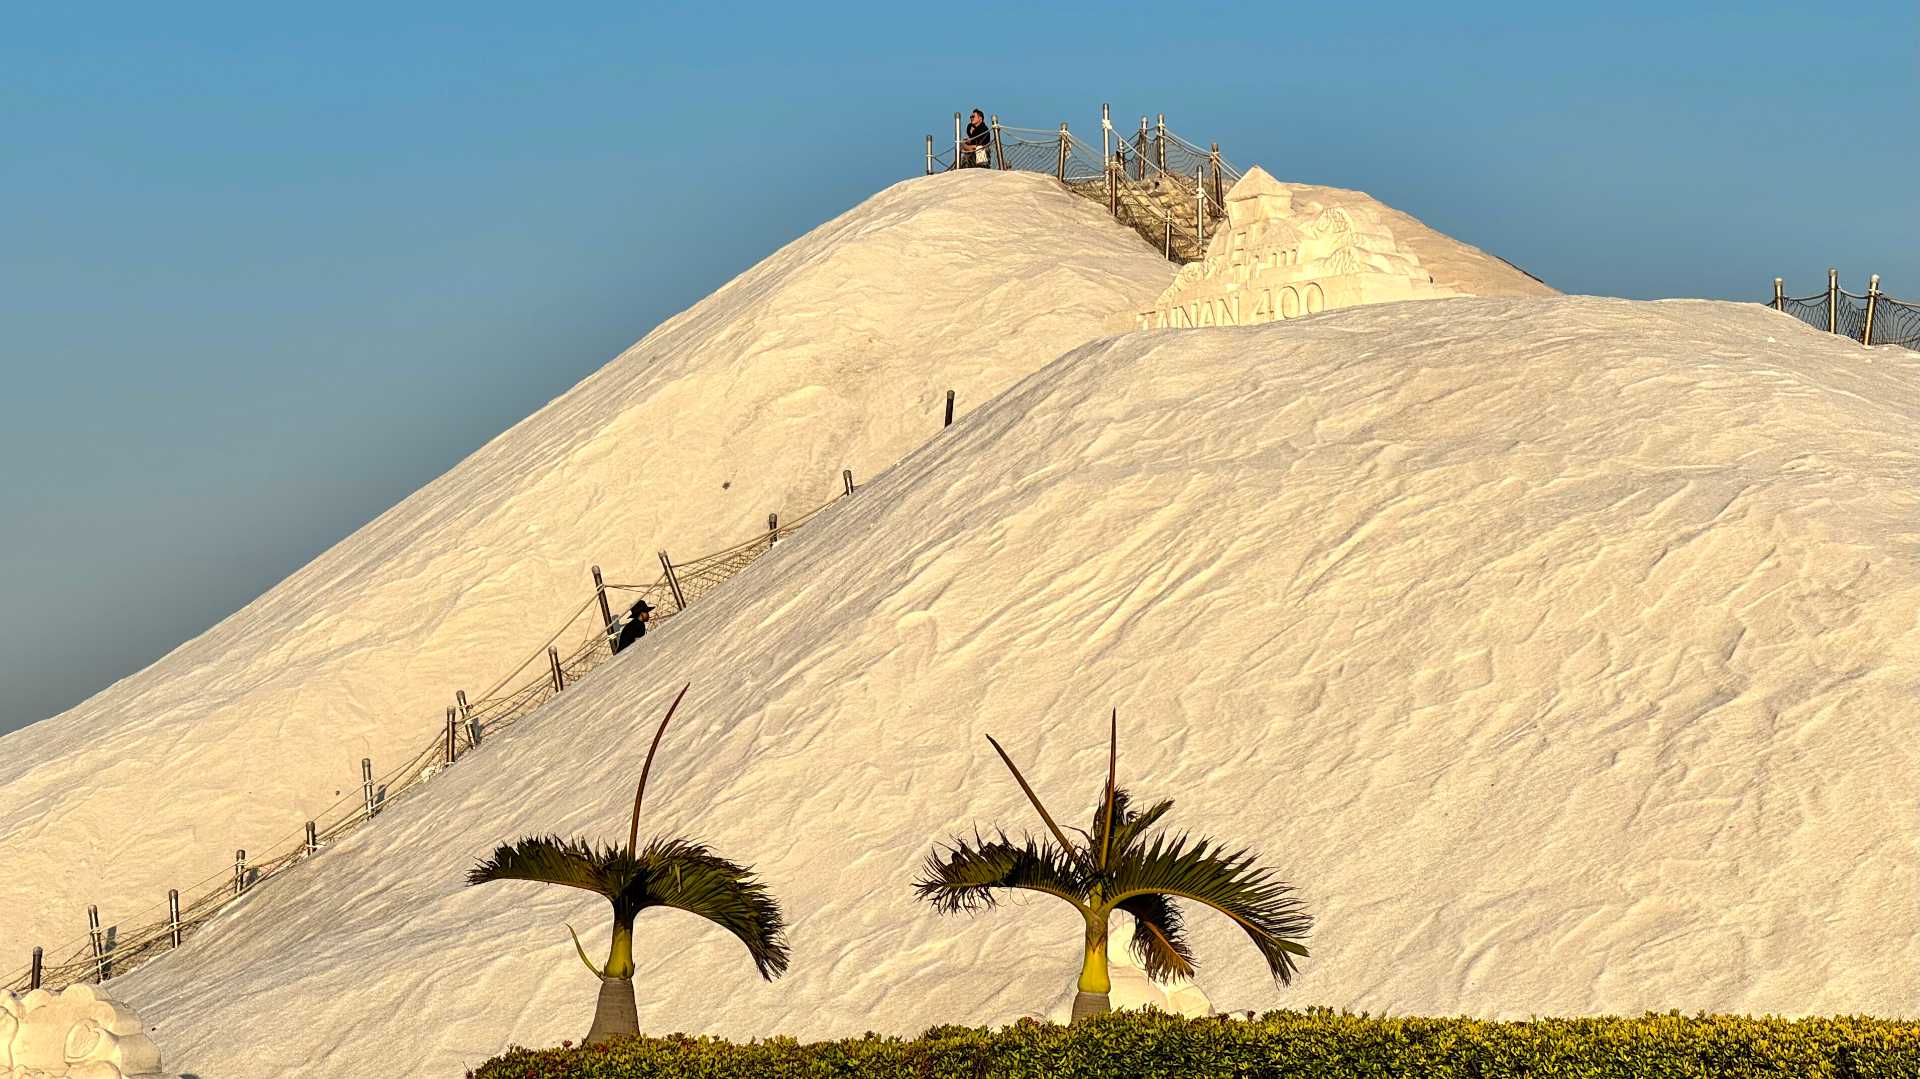 Qigu Salt Mountain just ahead of sunset. The salt mountain is 6 stories tall and has a walkway up two sides. The walkway has guide ropes strung between metal poles. Near the top of the salt mountain is a sculpture that includes the words ‘TAINAN 400’.